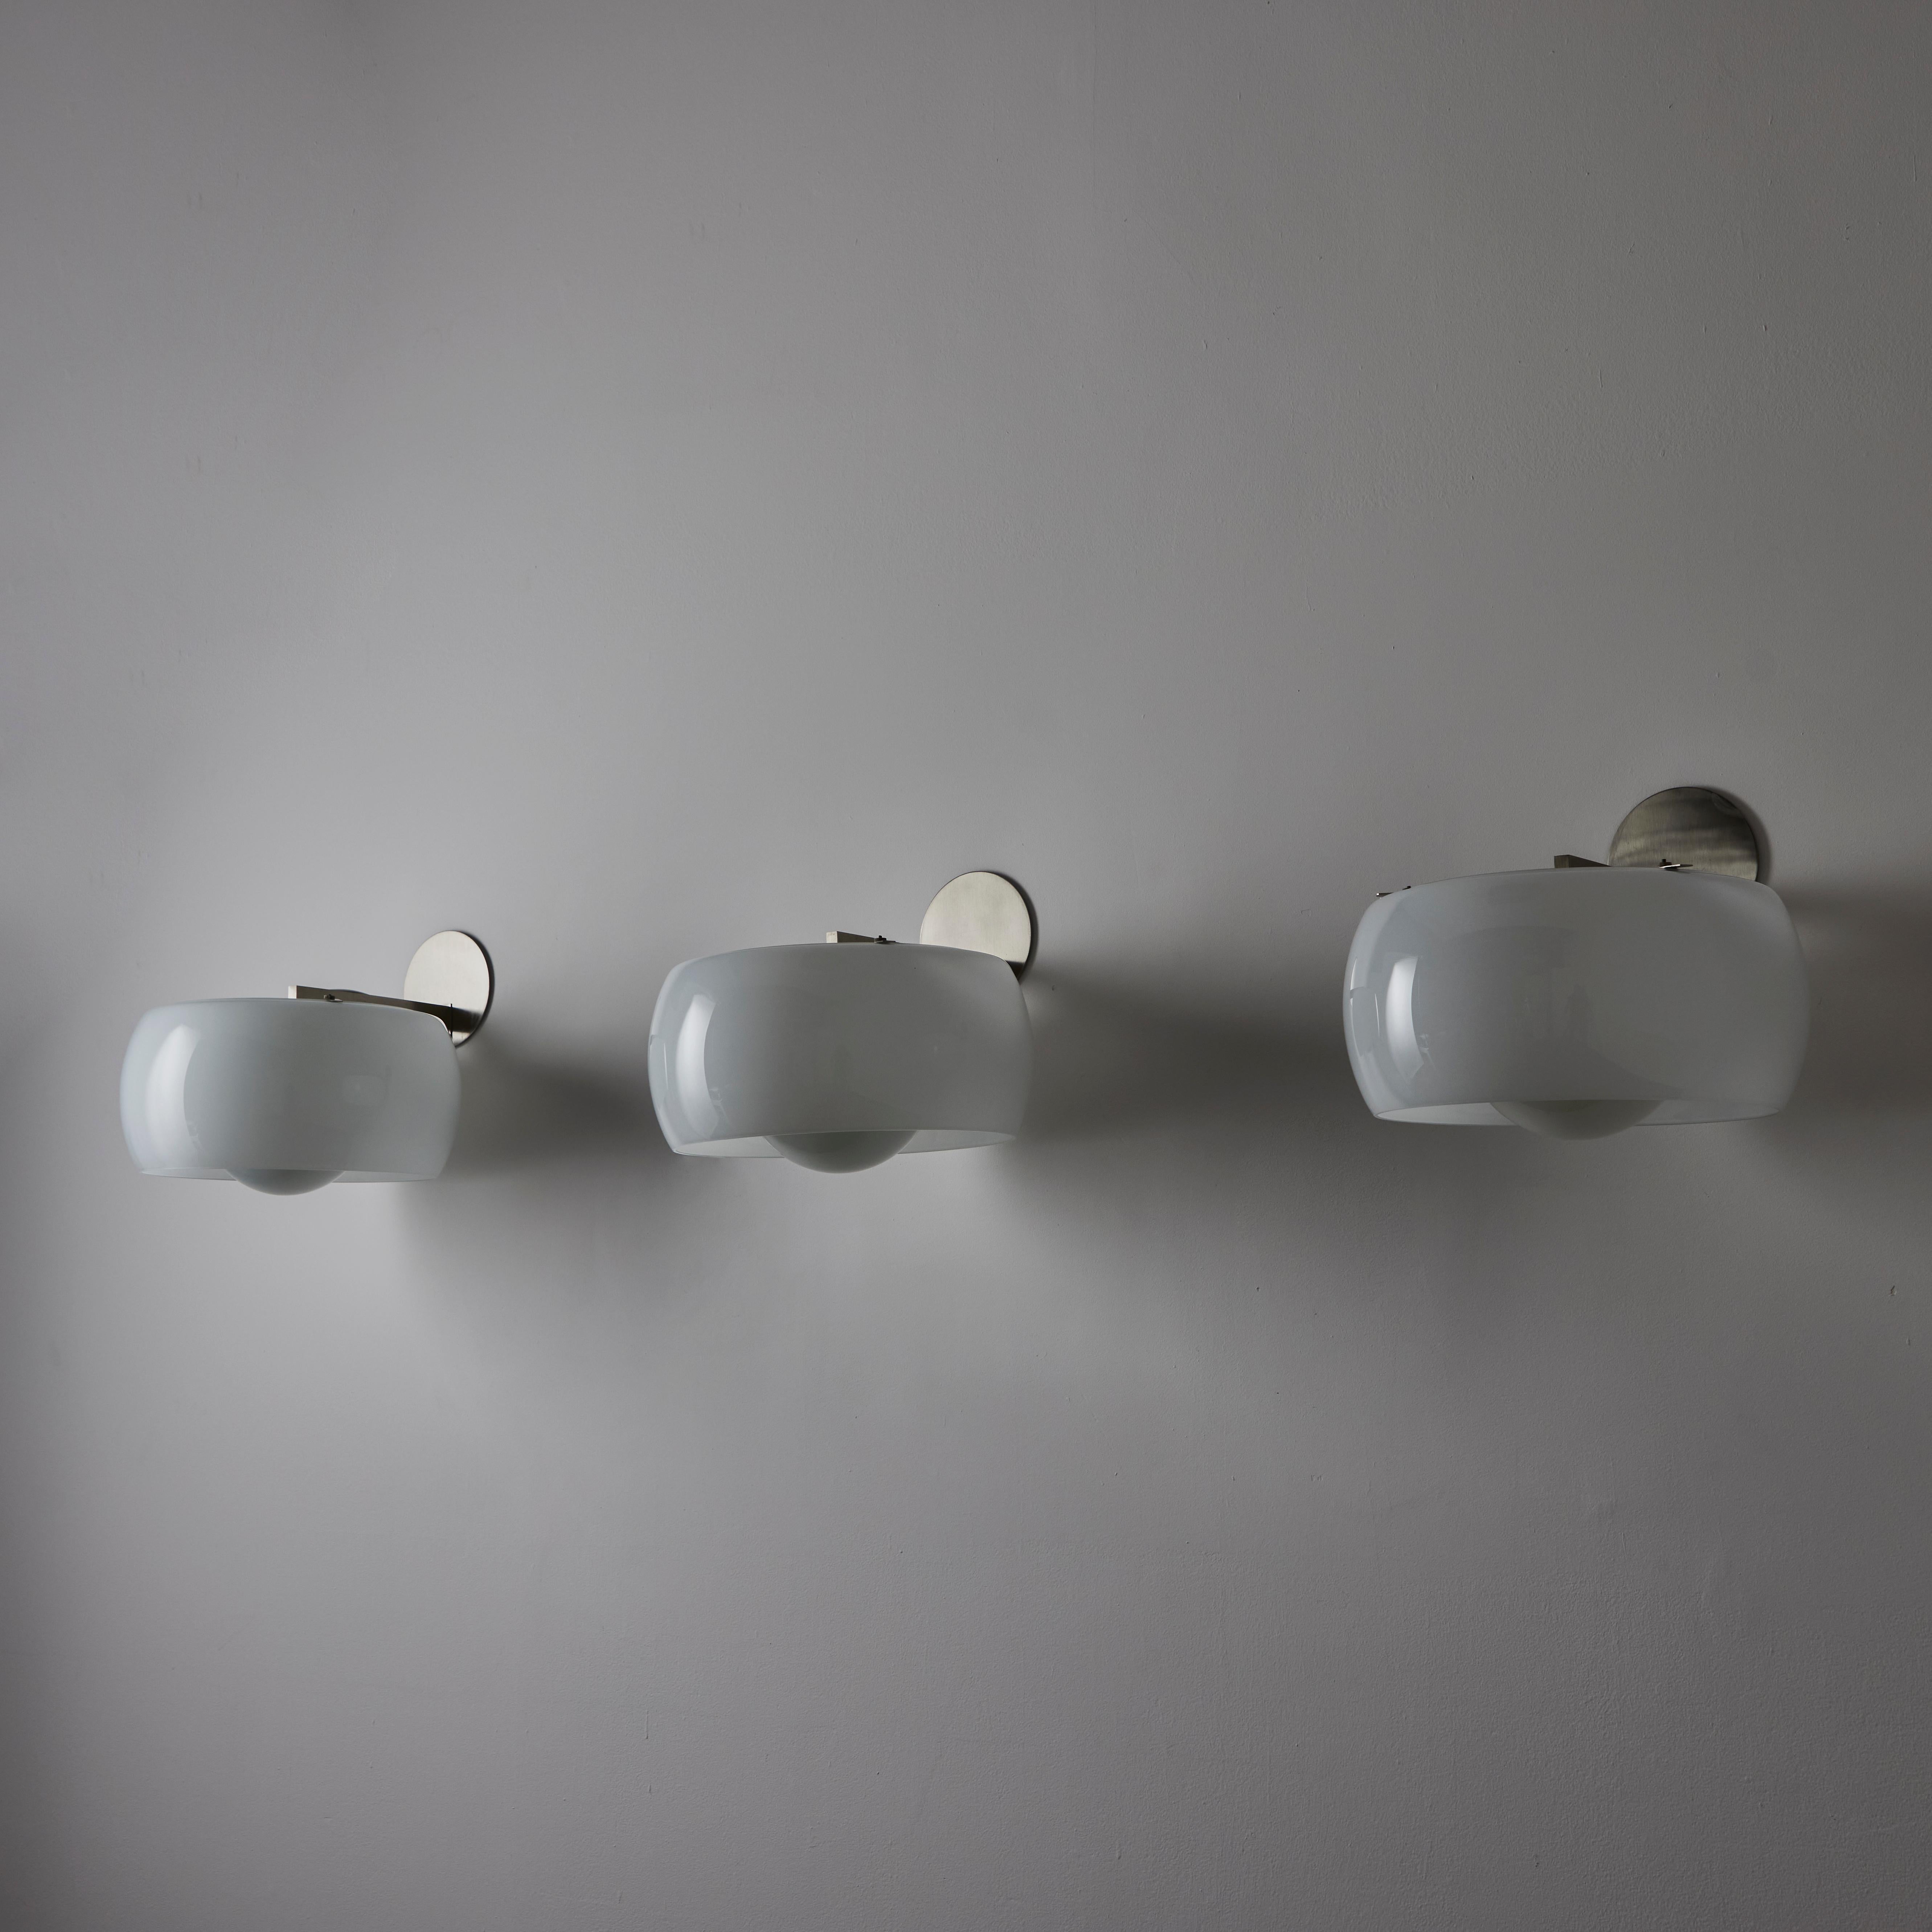 Mid-Century Modern 'Clinio' Wall Lights by Vico Magistretti for Artemide For Sale